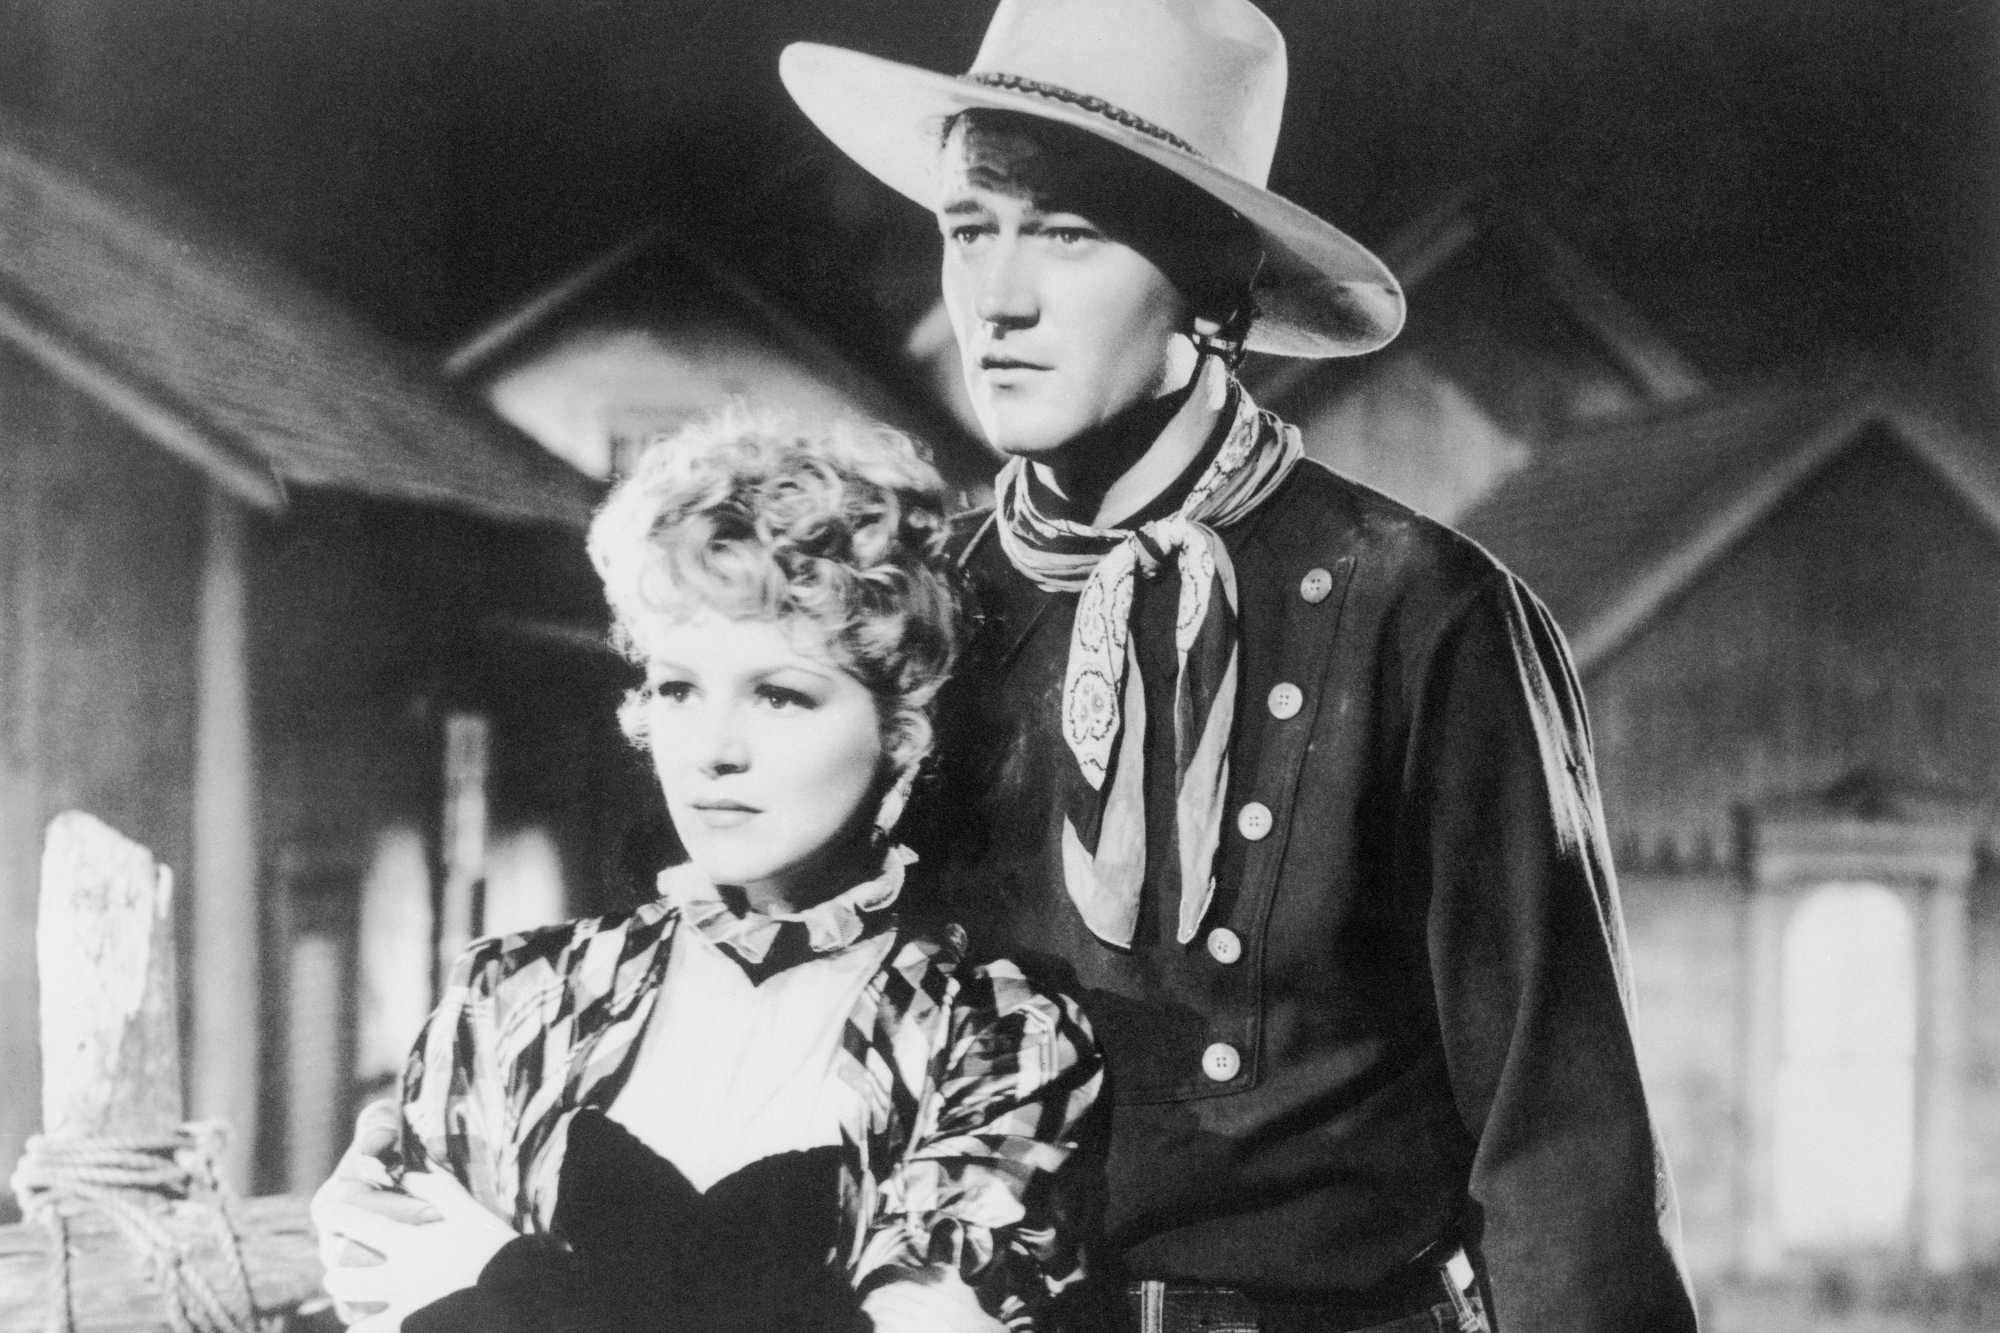 'Stagecoach' Claire Trevor as Dallas and John Wayne as Ringo Kid in John Ford movie. They're standing next to one another in Western costumes looking surprised.